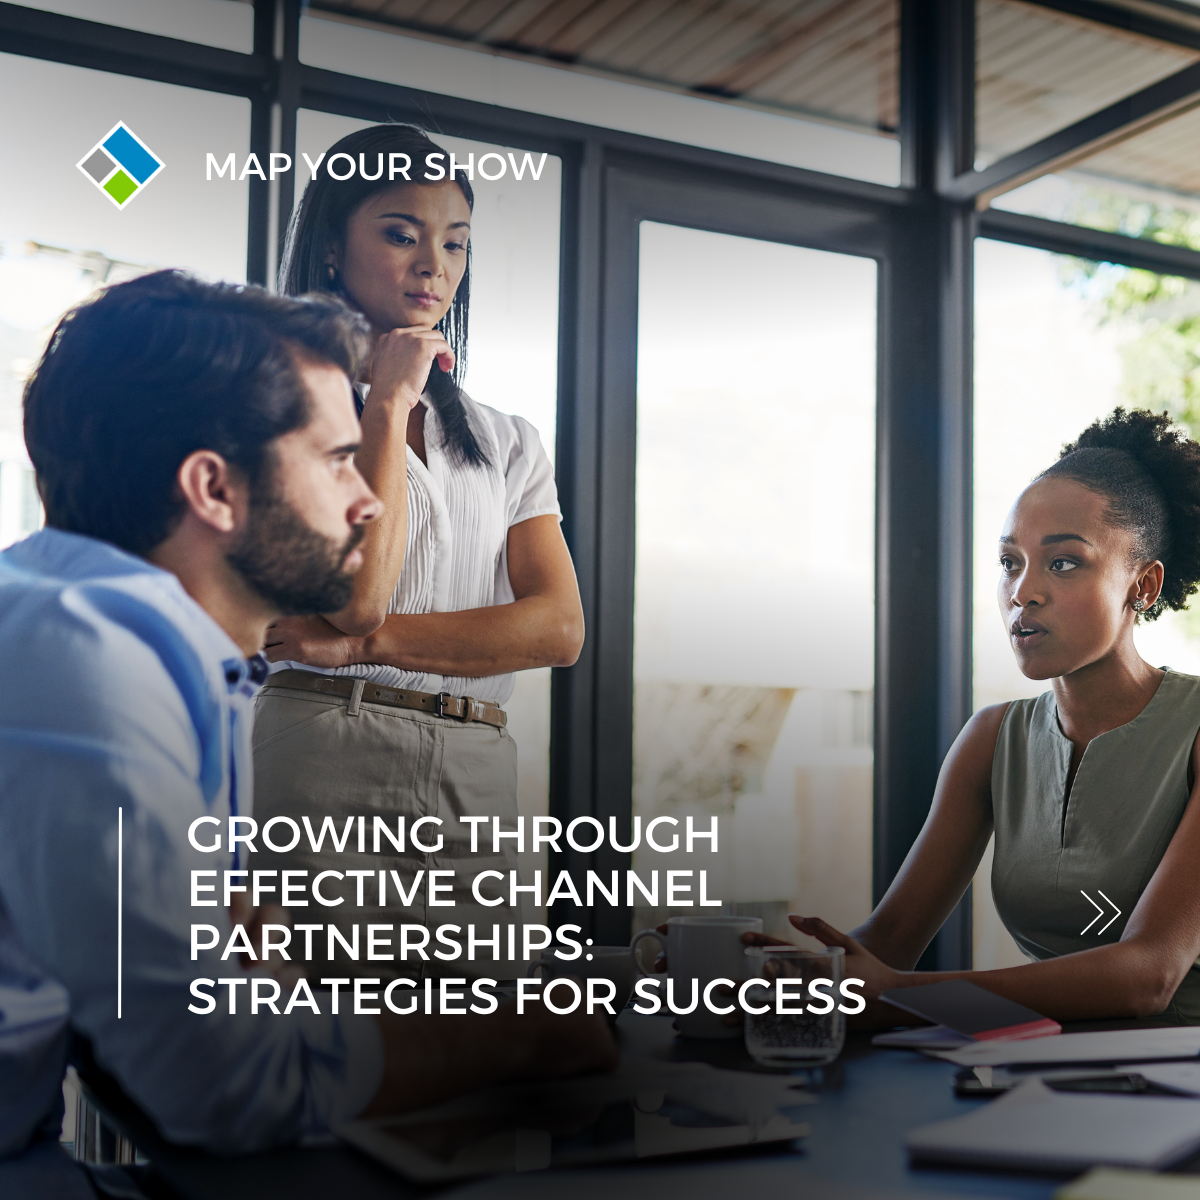 Growing Through Effective Channel Partnerships: Strategies for Success. Map Your Show. Event Management Technology.